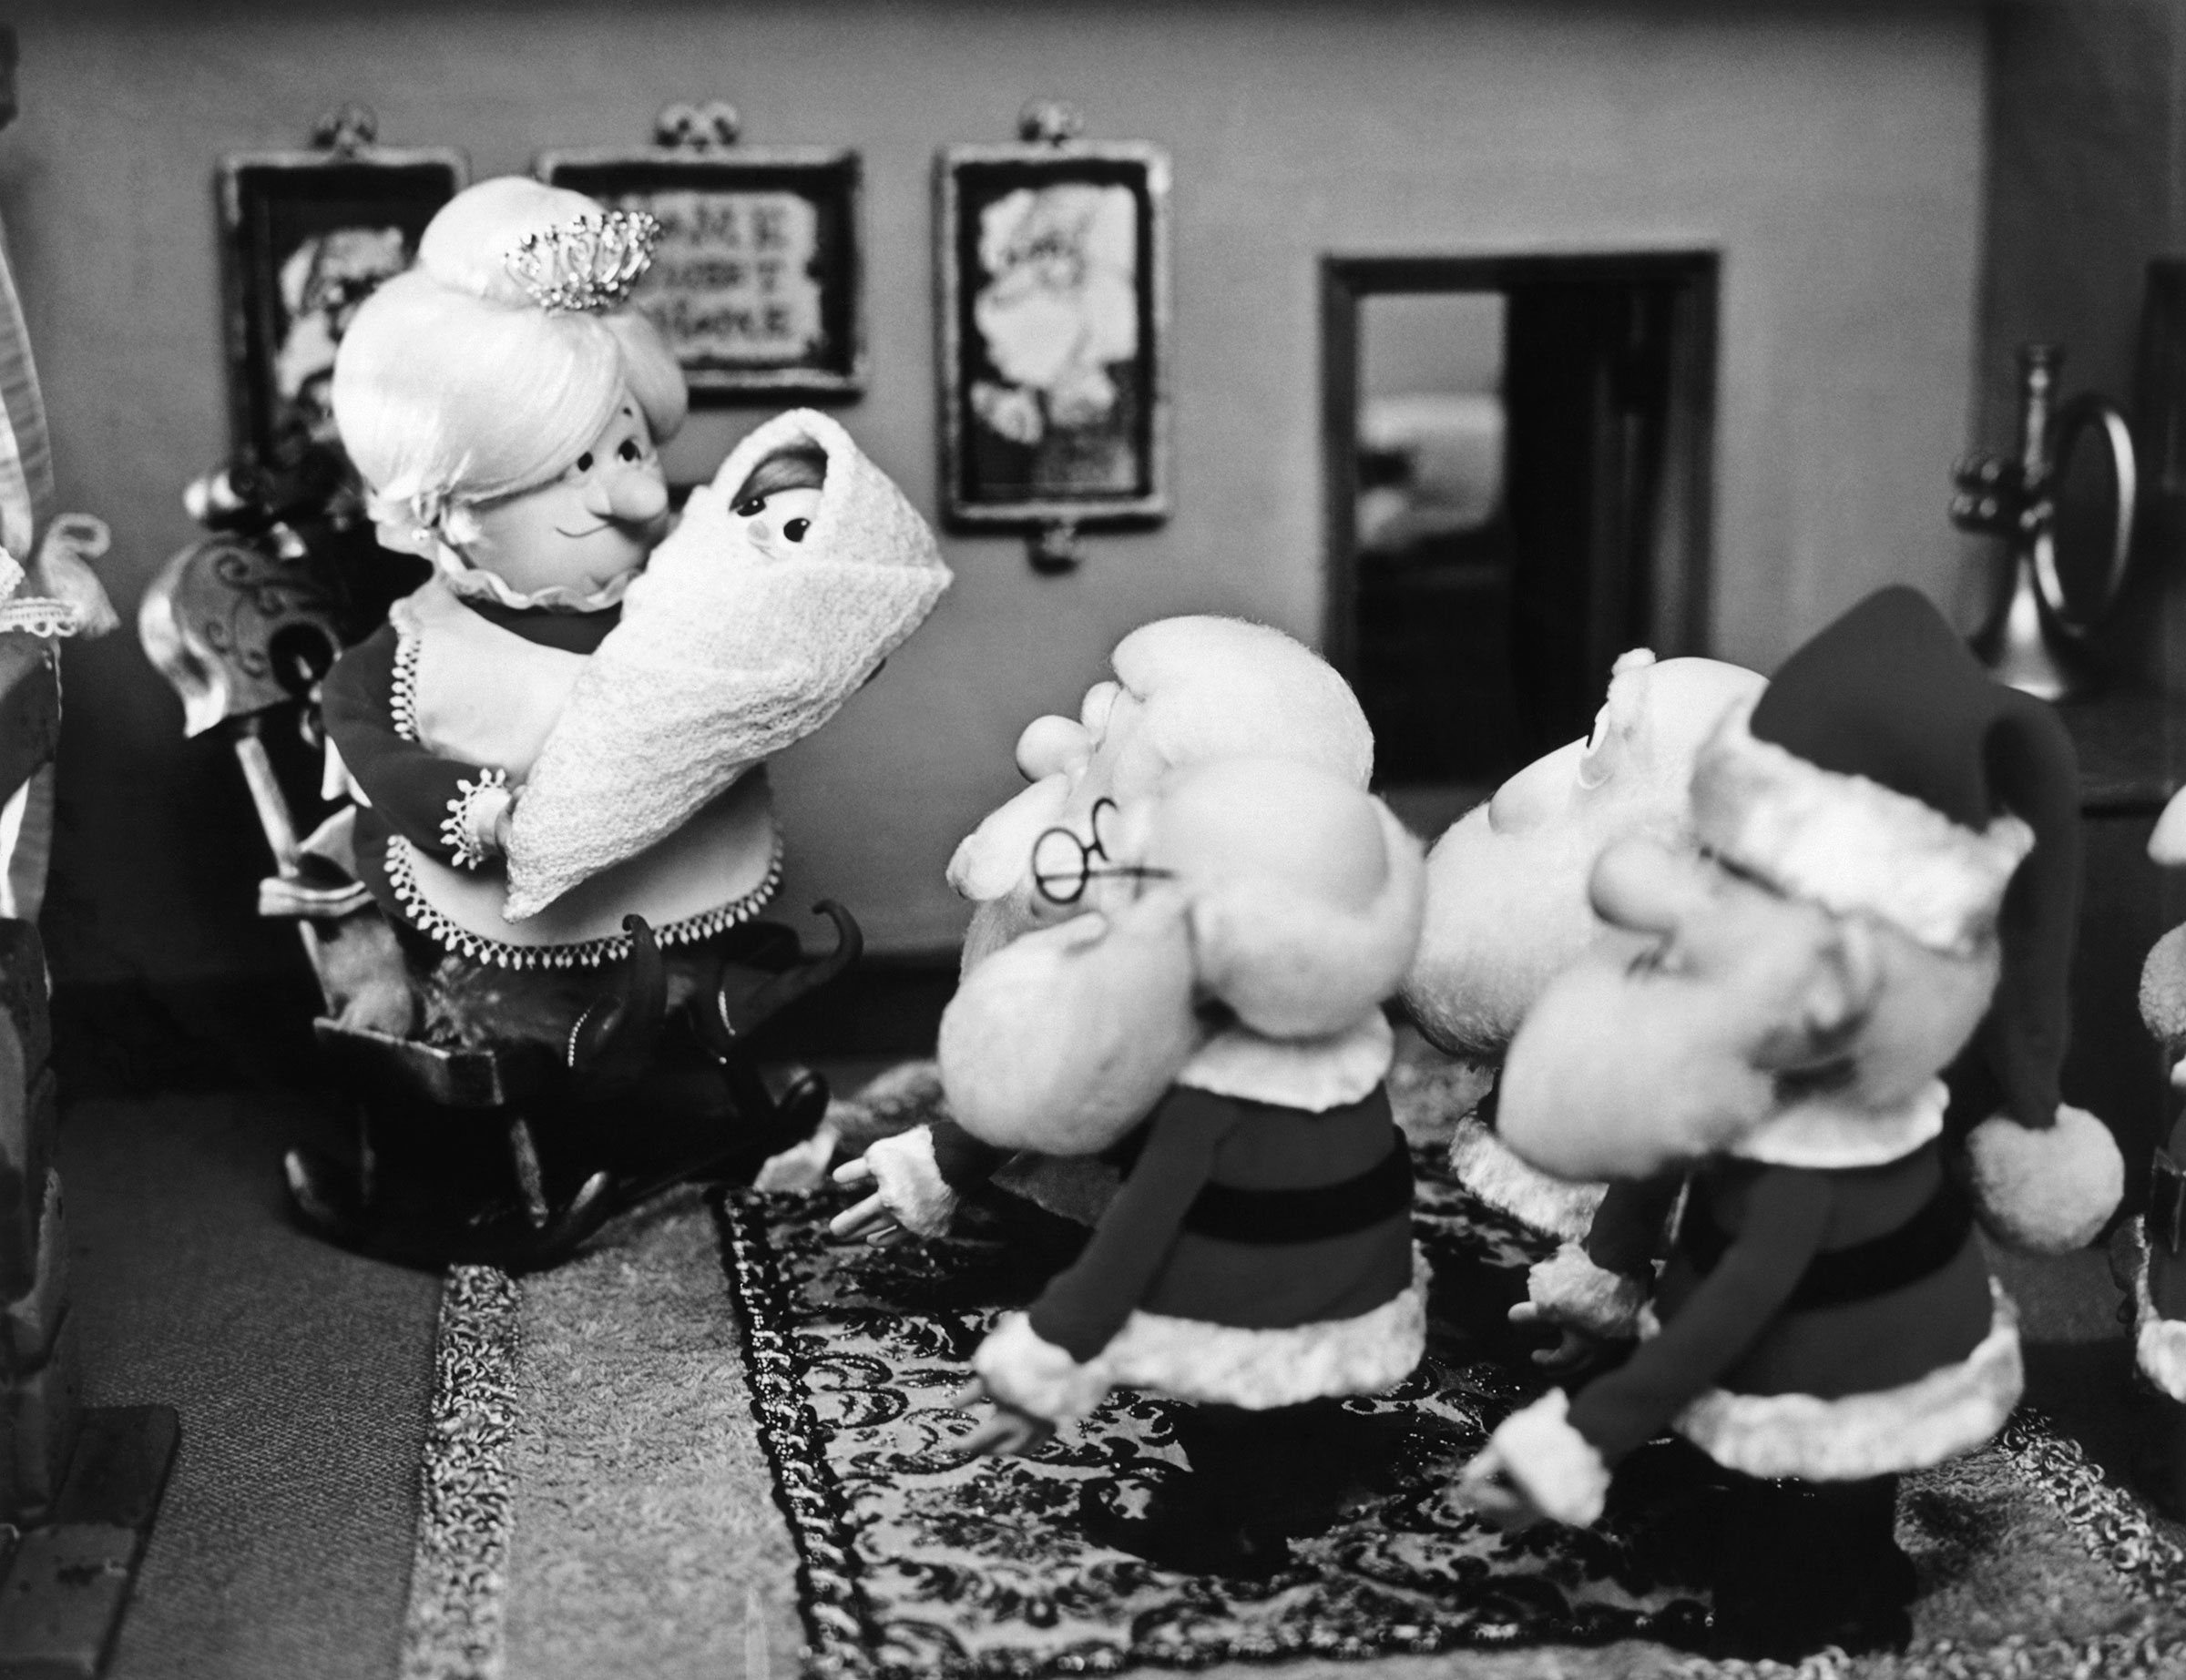 SANTA CLAUS IS COMIN' TO TOWN, from left: Tanta Kringle, Kris Kringle, The Kringle Elves, 1970